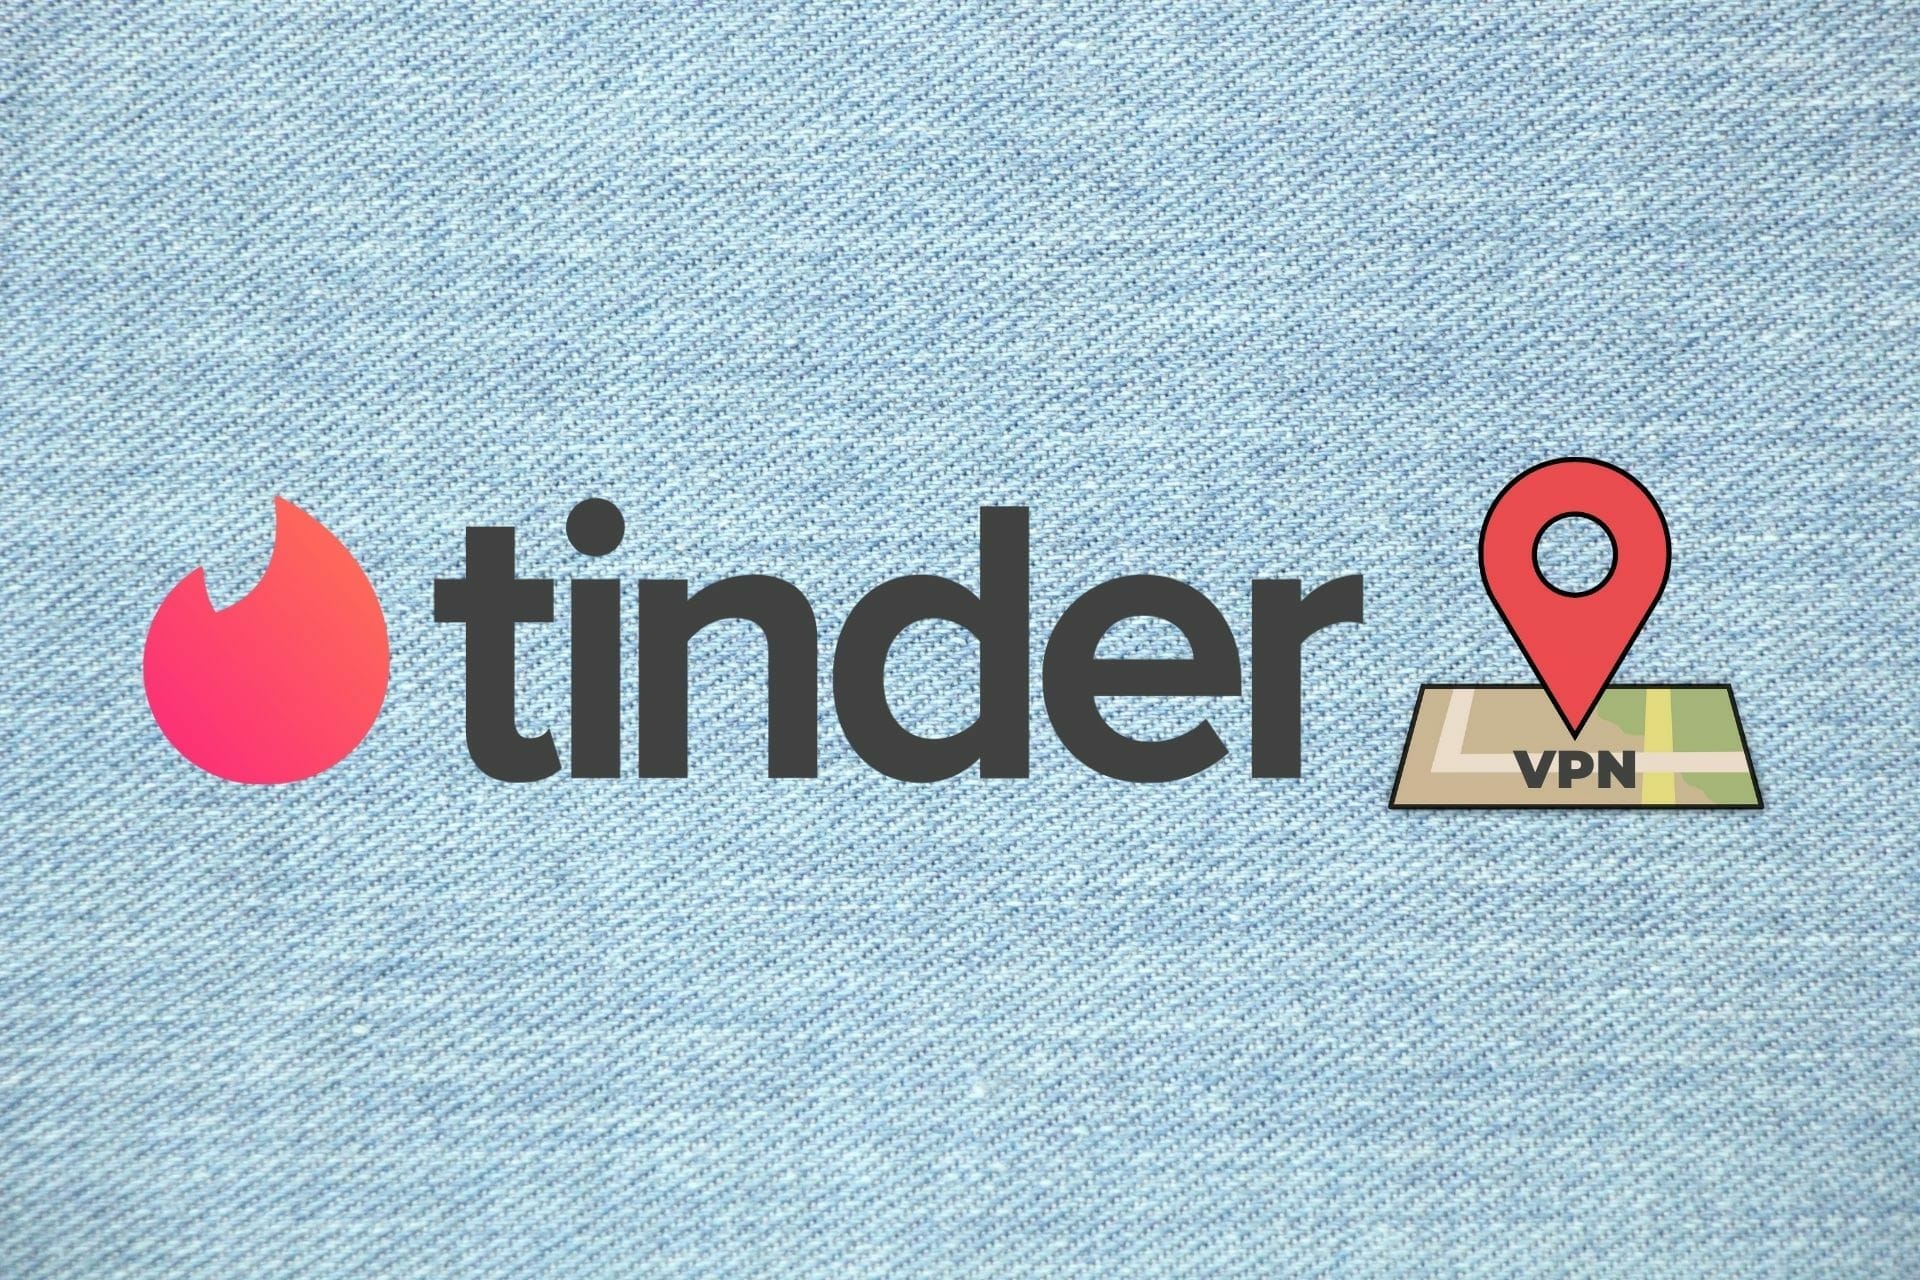 How to change your location on tinder